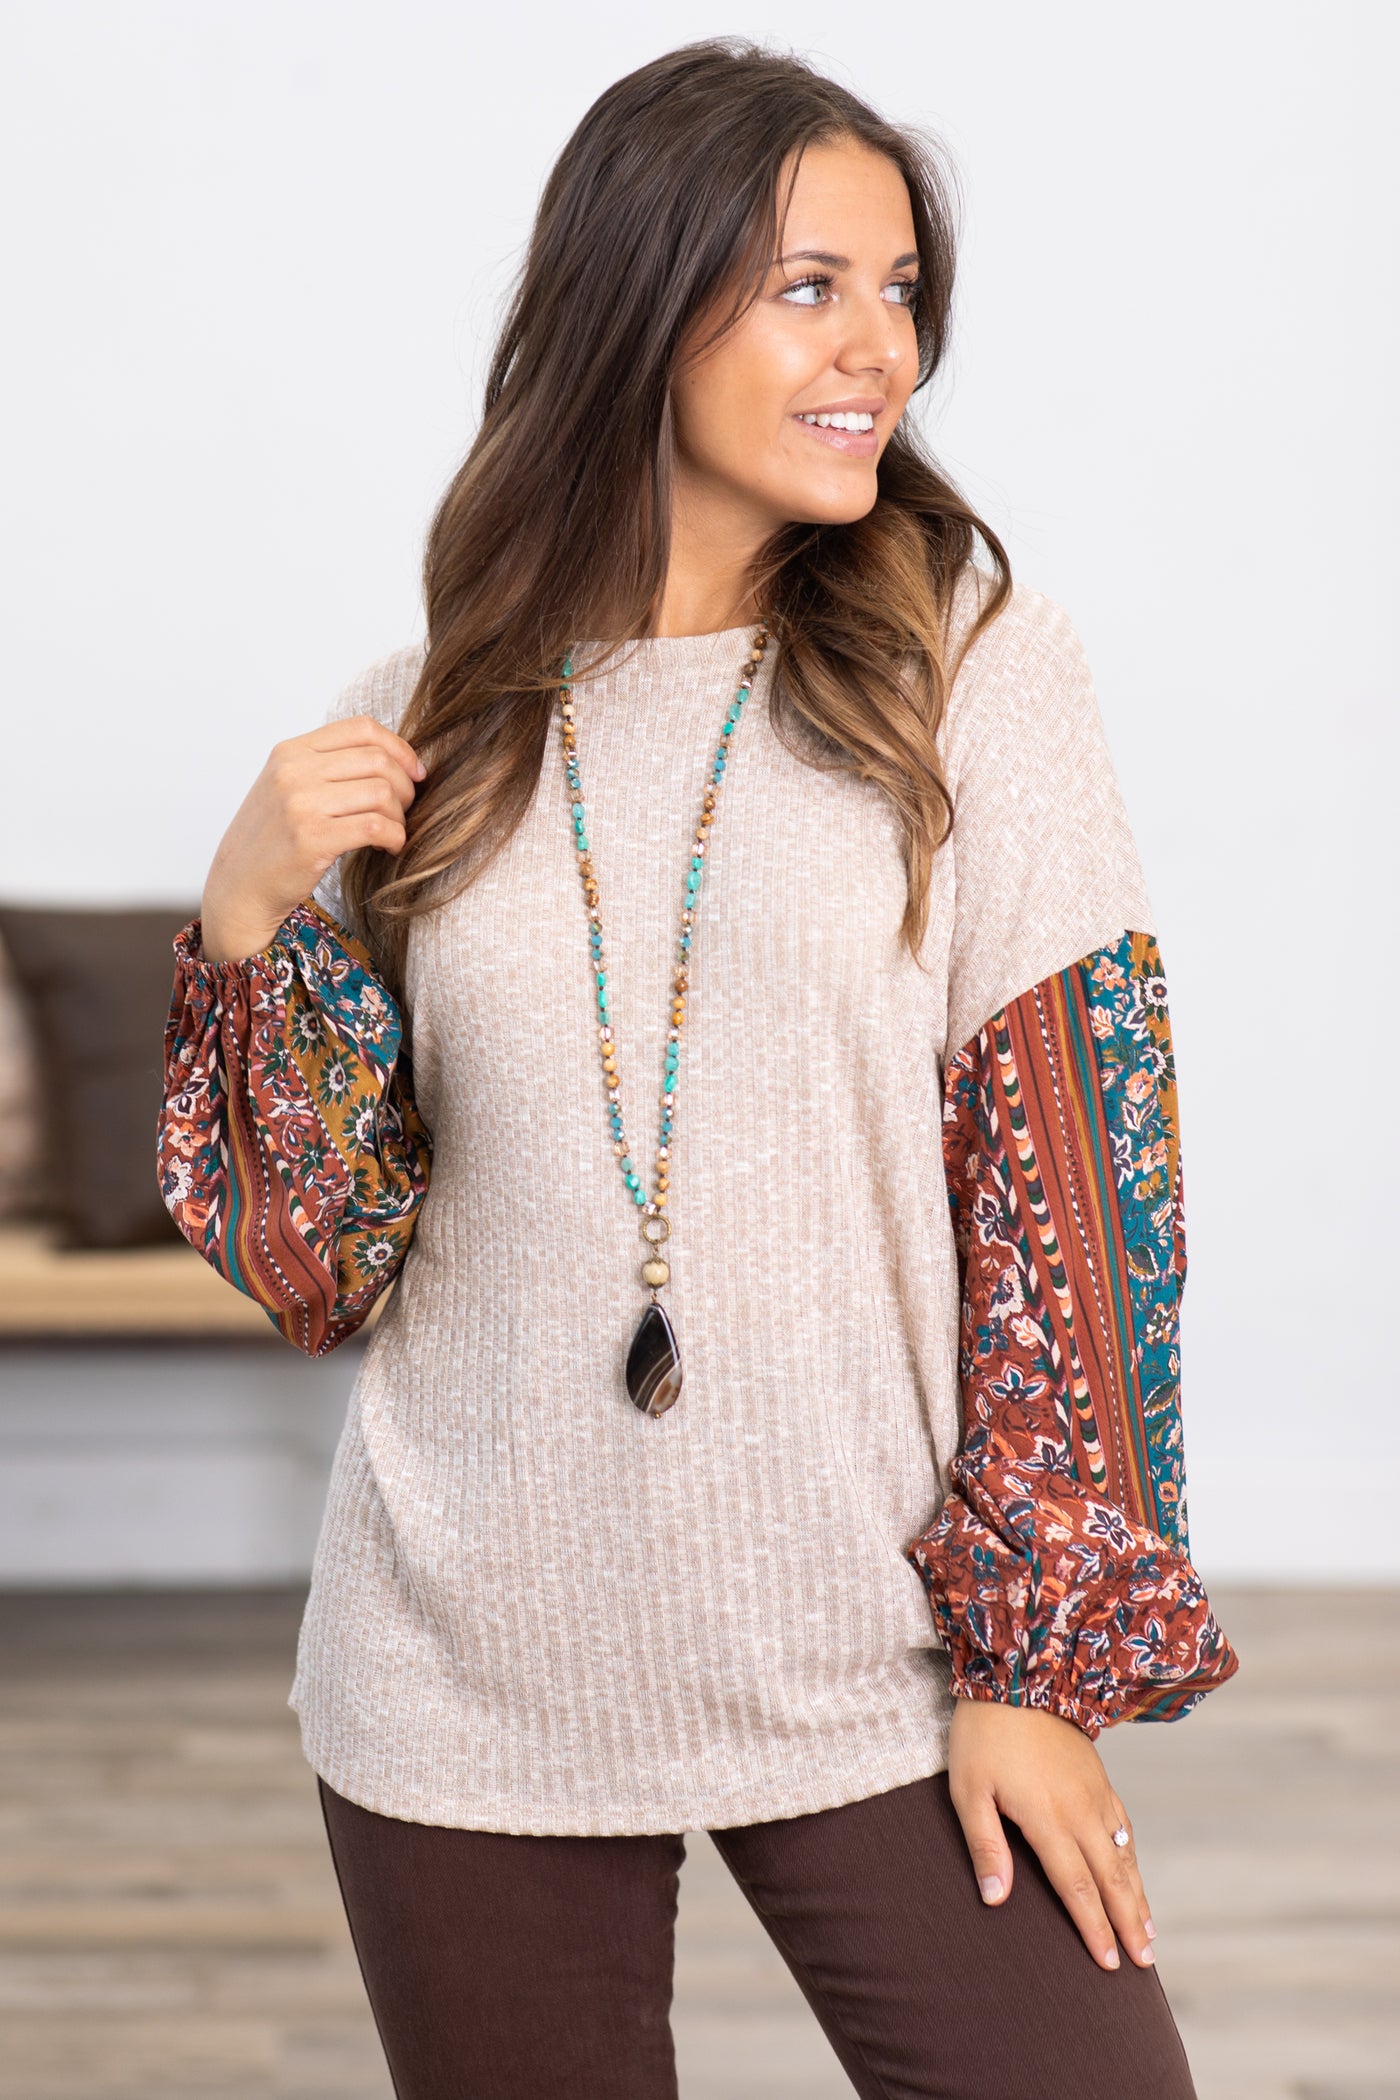 Oatmeal Waffle Knit Top With Floral Sleeves